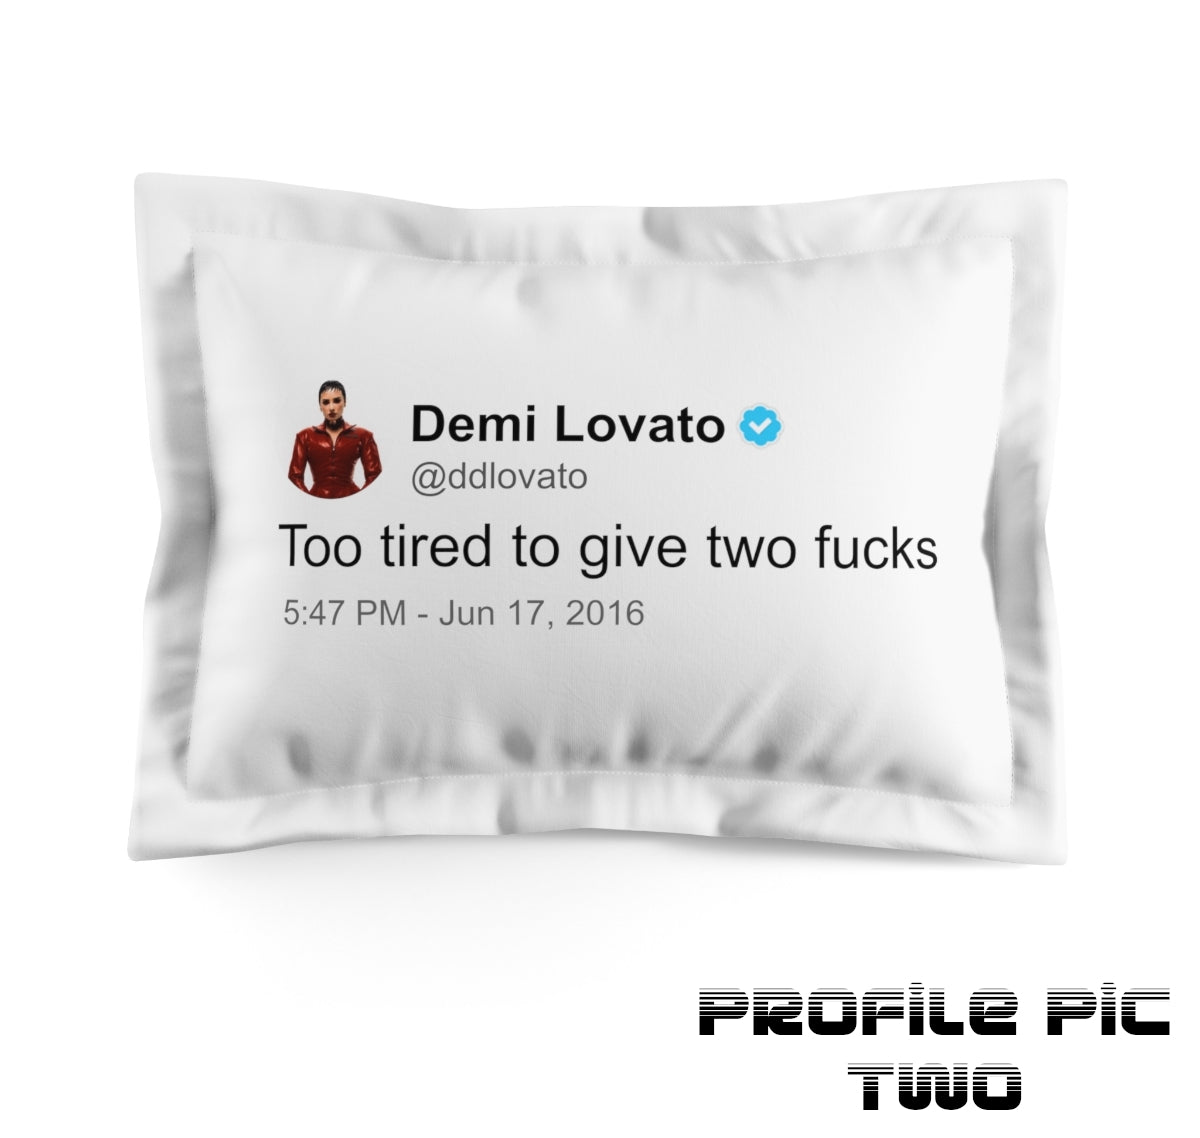 This previews the same pillow case shot from the same angle but with an alternative choice of Demi profile picture next to the tweet